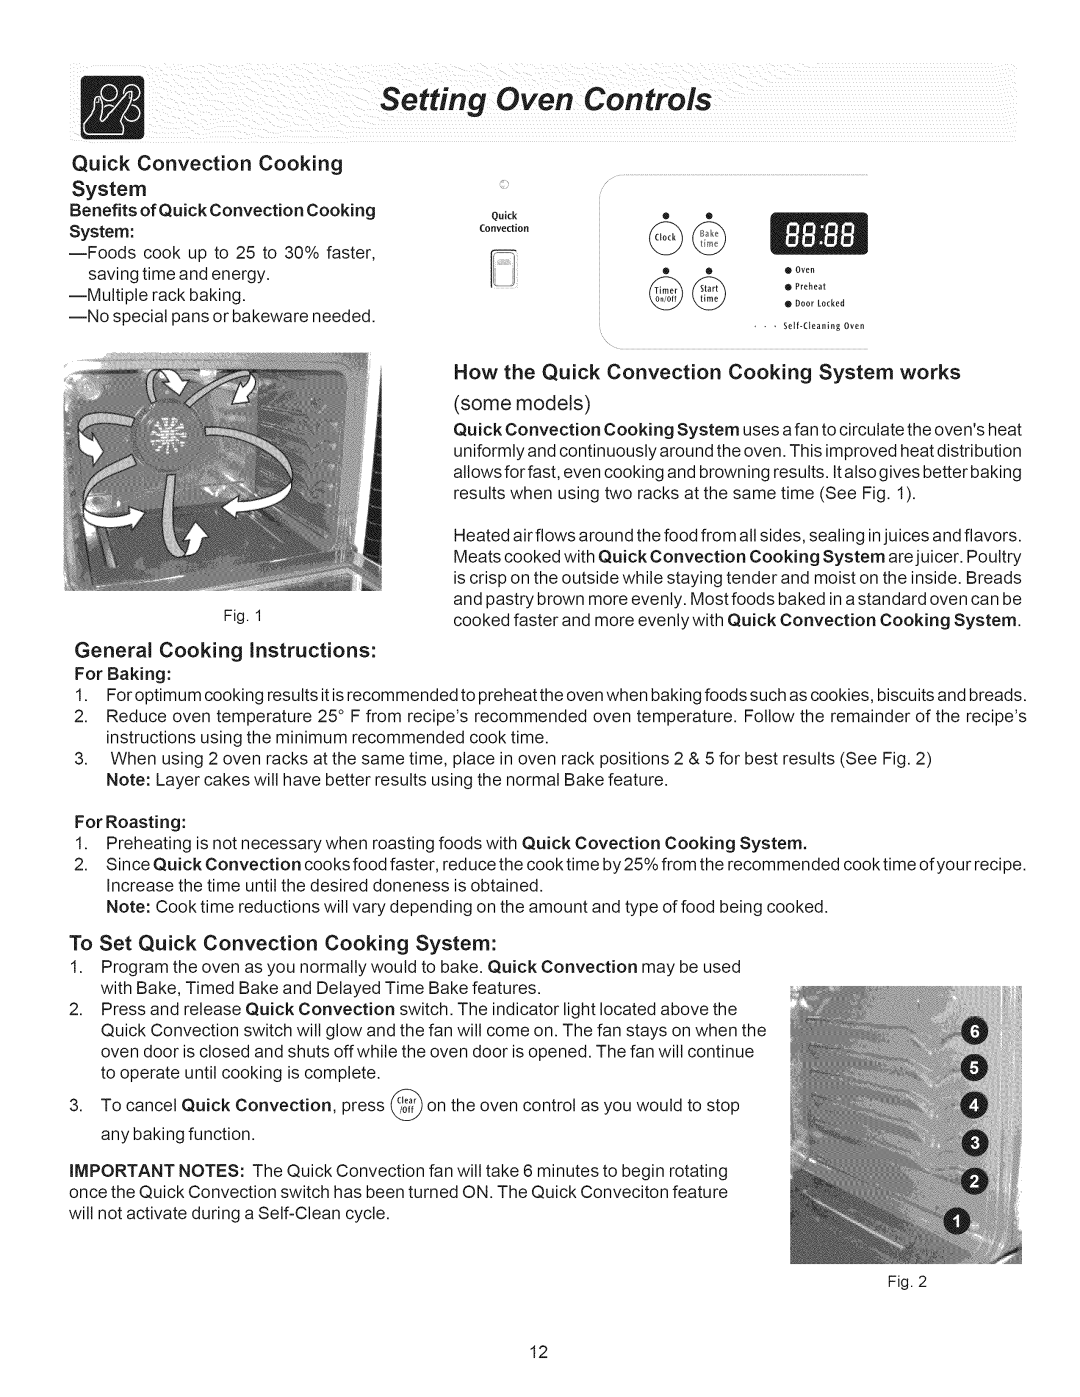 Crosley ES300 Quick Convection Cooking System, How the Quick Convection, works, some models, General Cooking instructions 